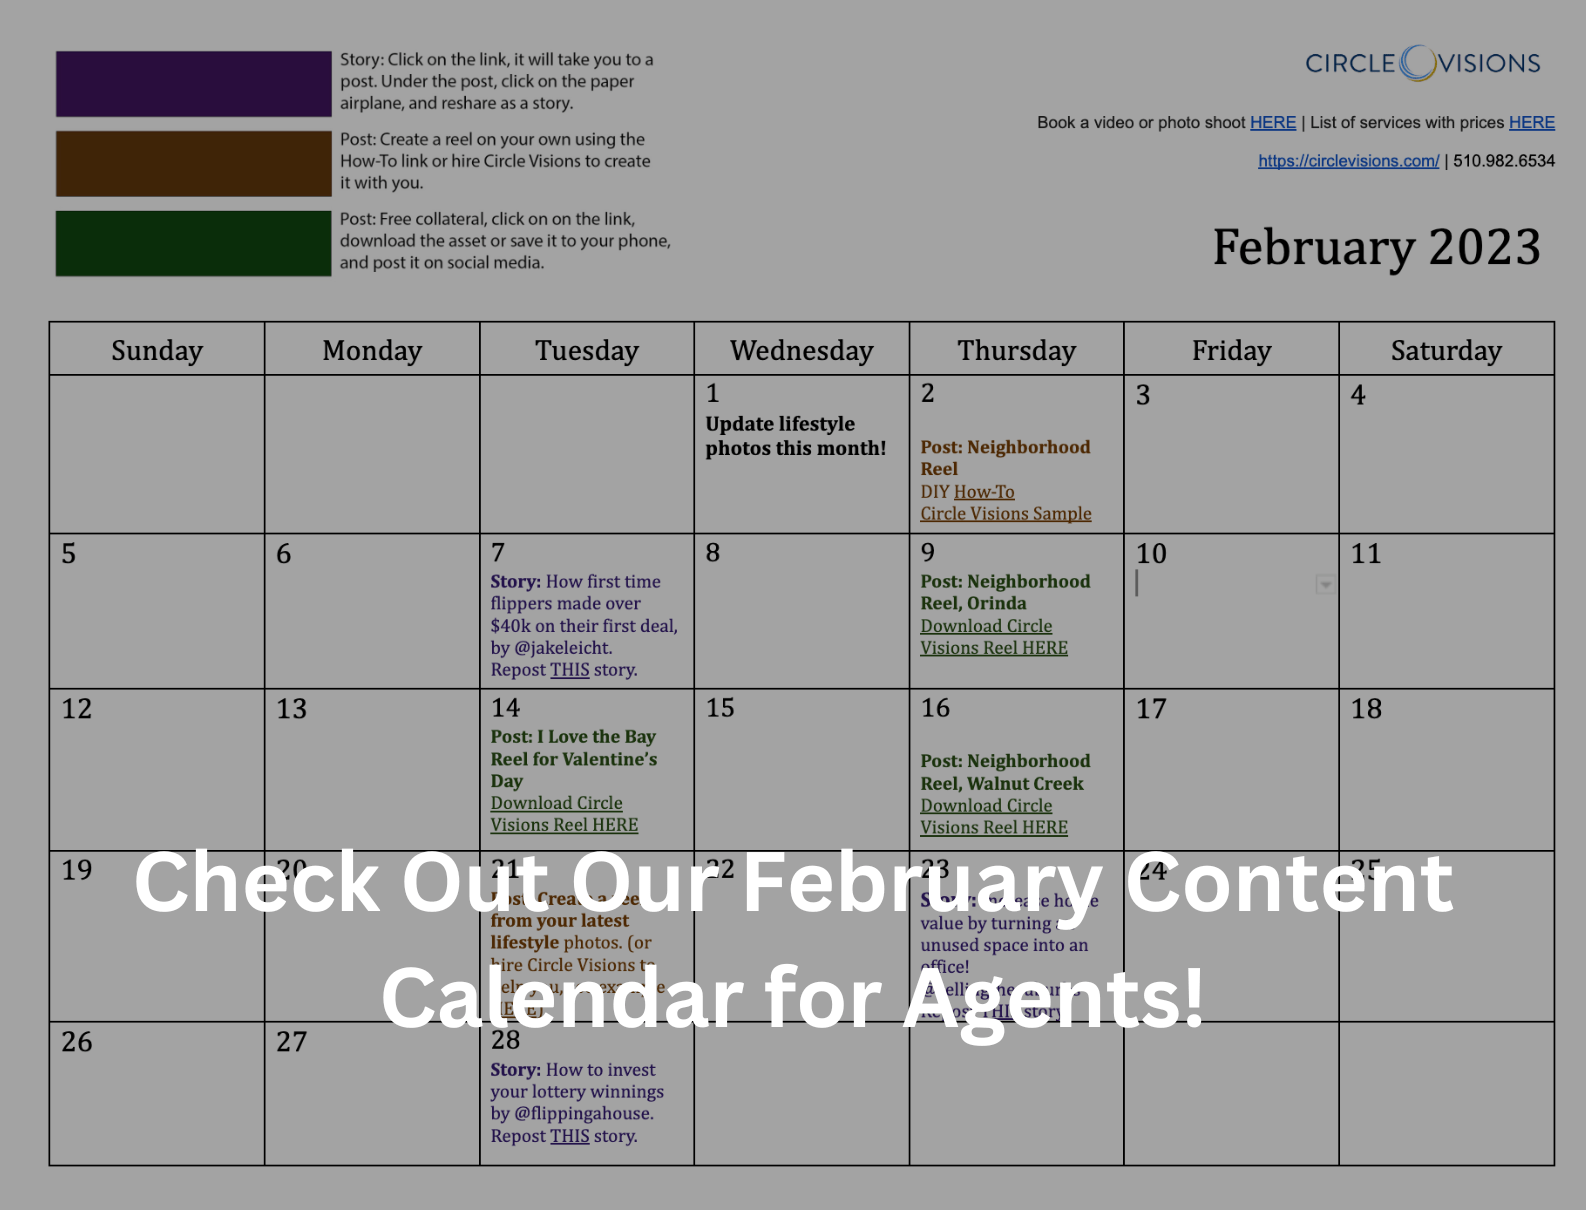 Check Out Our February Content Calendar For